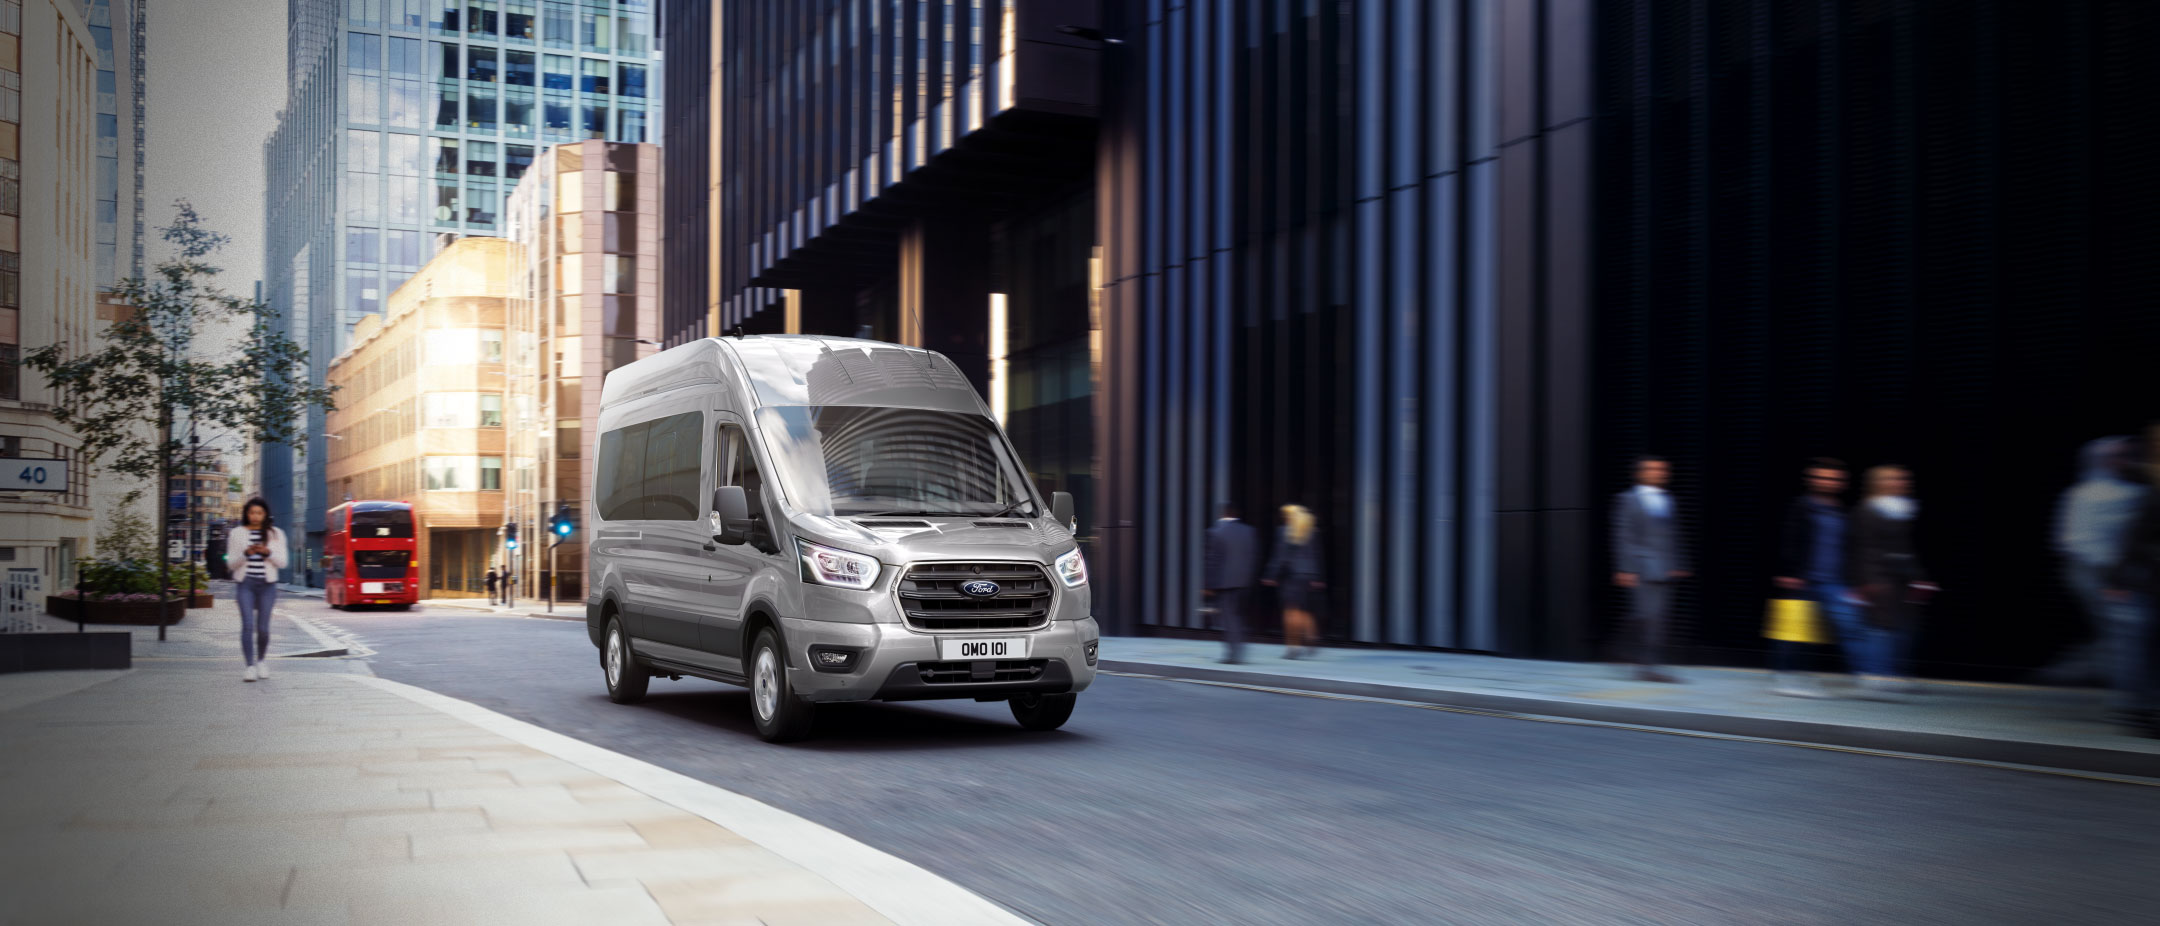 Front view of the new Ford Transit Minibus driving on a quiet road in London